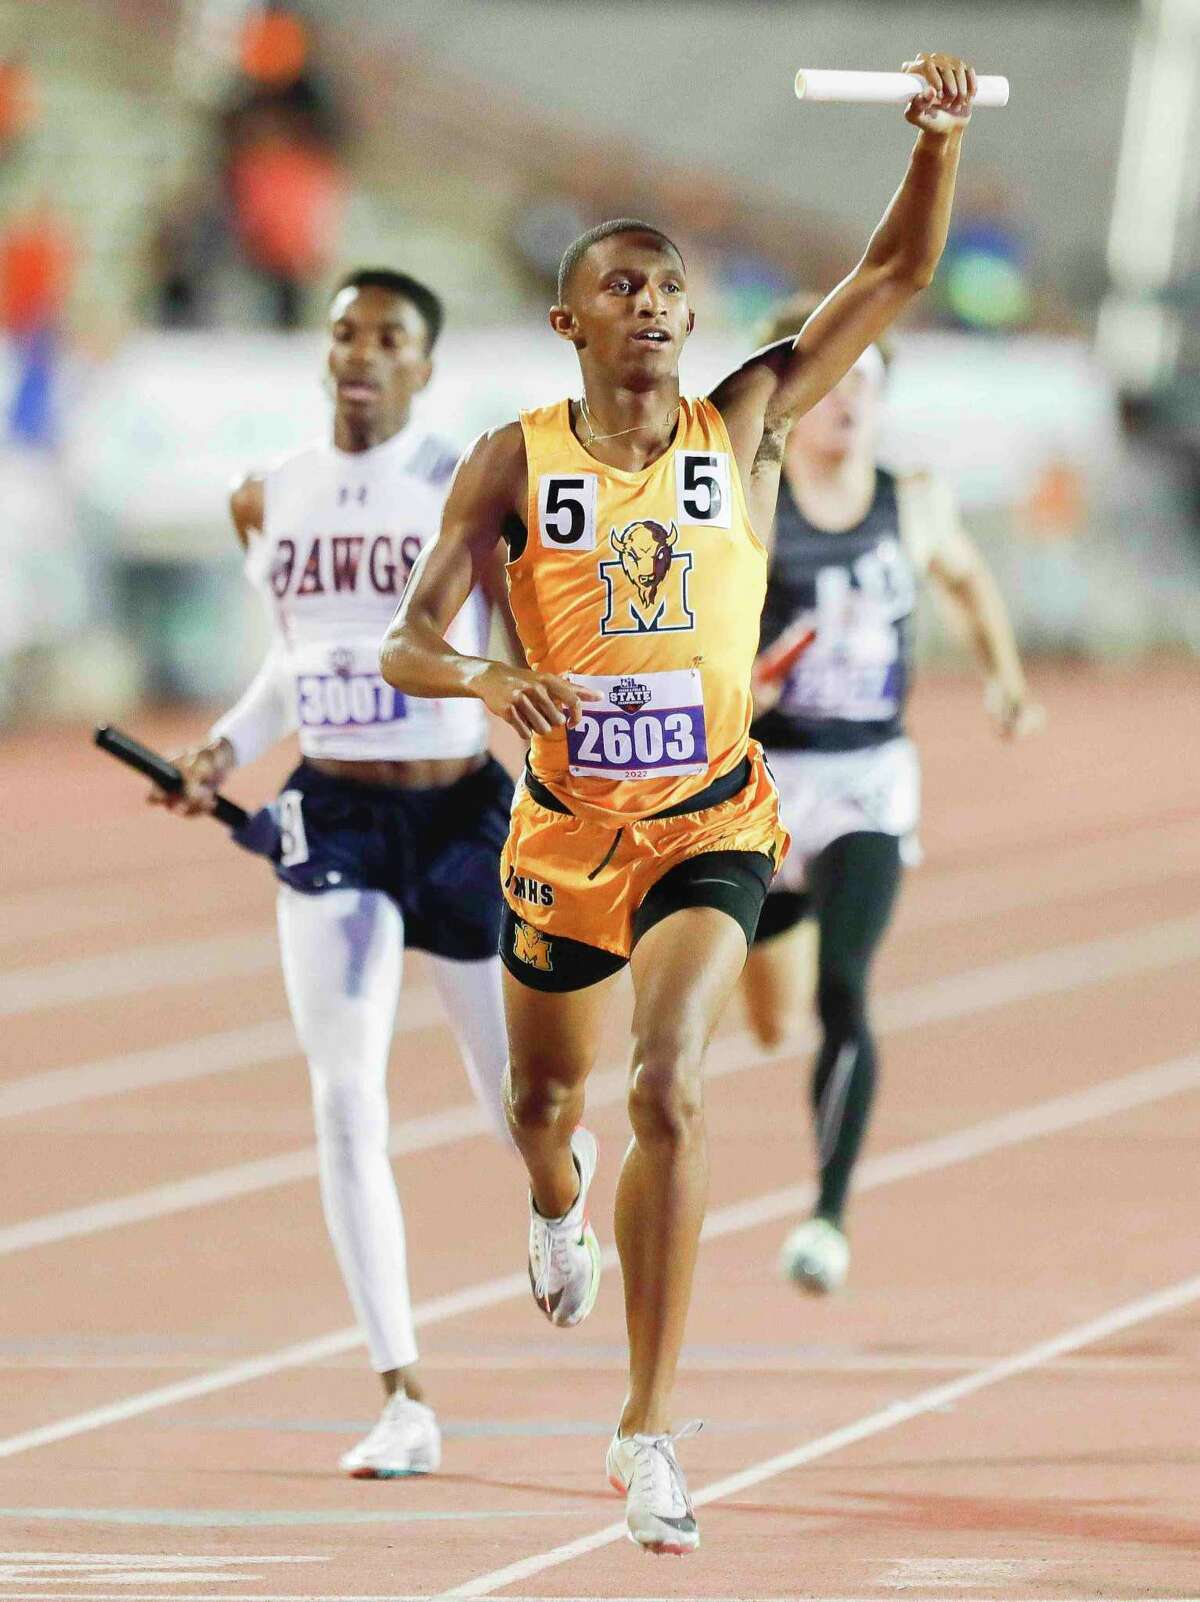 Chris Brinkley of Fort Bend Marshall reacts after leading the Buffaloes to a first-place finish in the Class 5A boys 1,600-meter relay during the UIL State Track & Field Championships at Mike a Myers Stadium, Friday, May 13, 2022, in Austin.